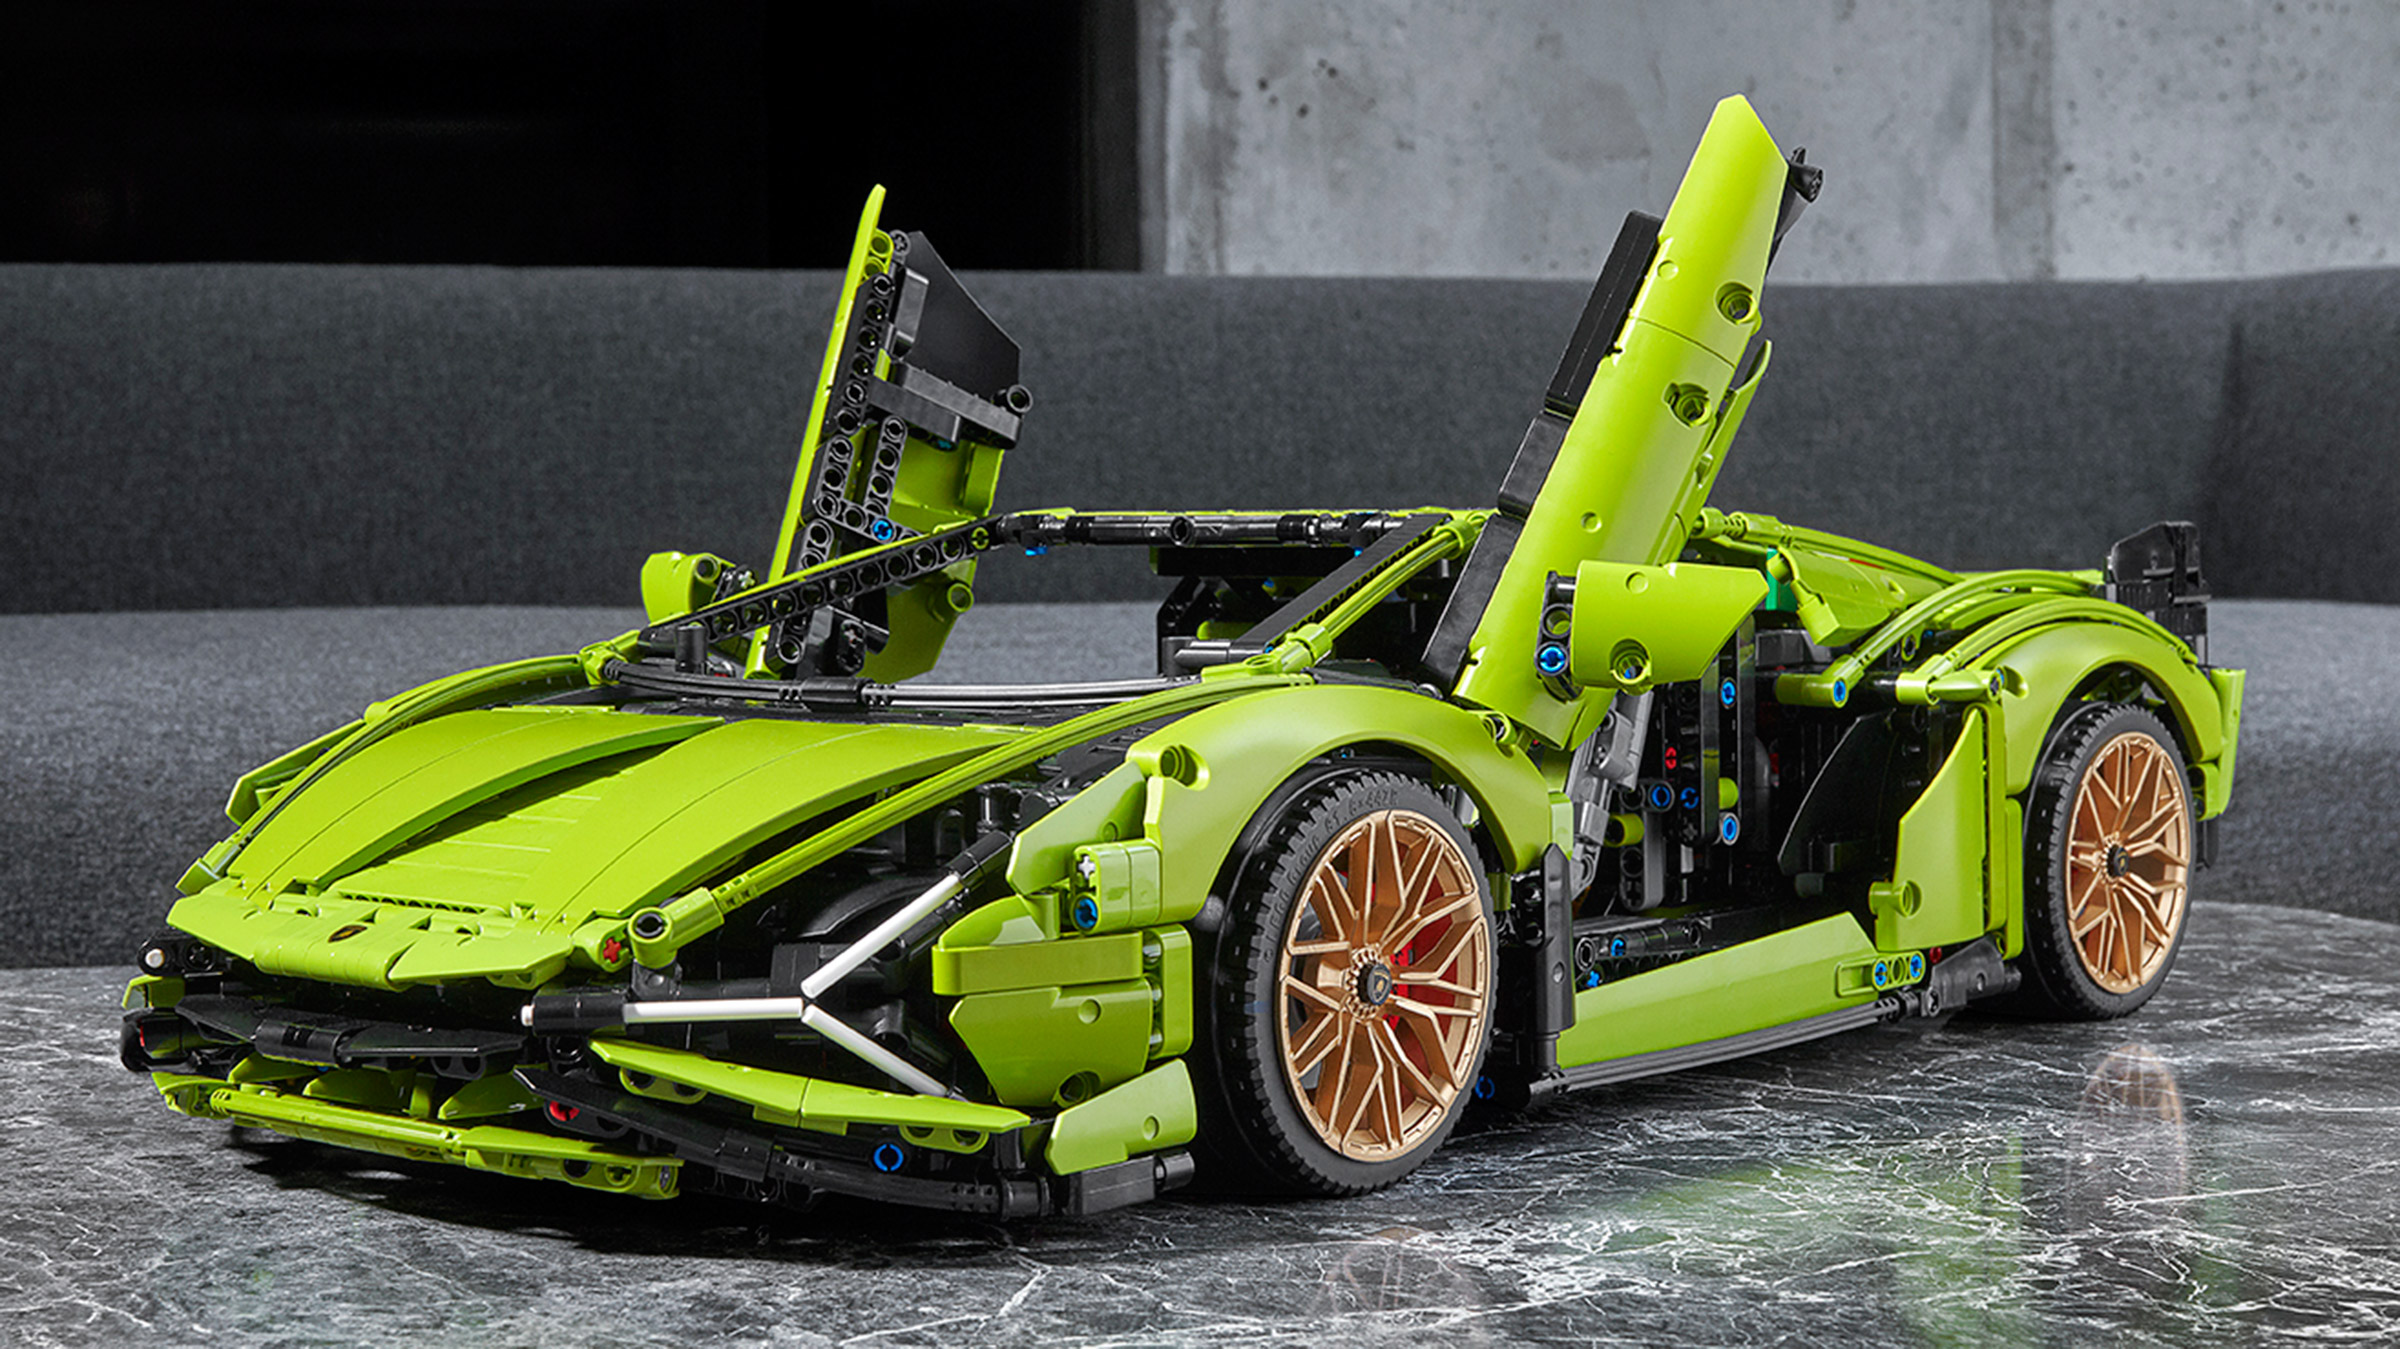 New Lego Lamborghini Sian blasts in with 3,696 pieces and 